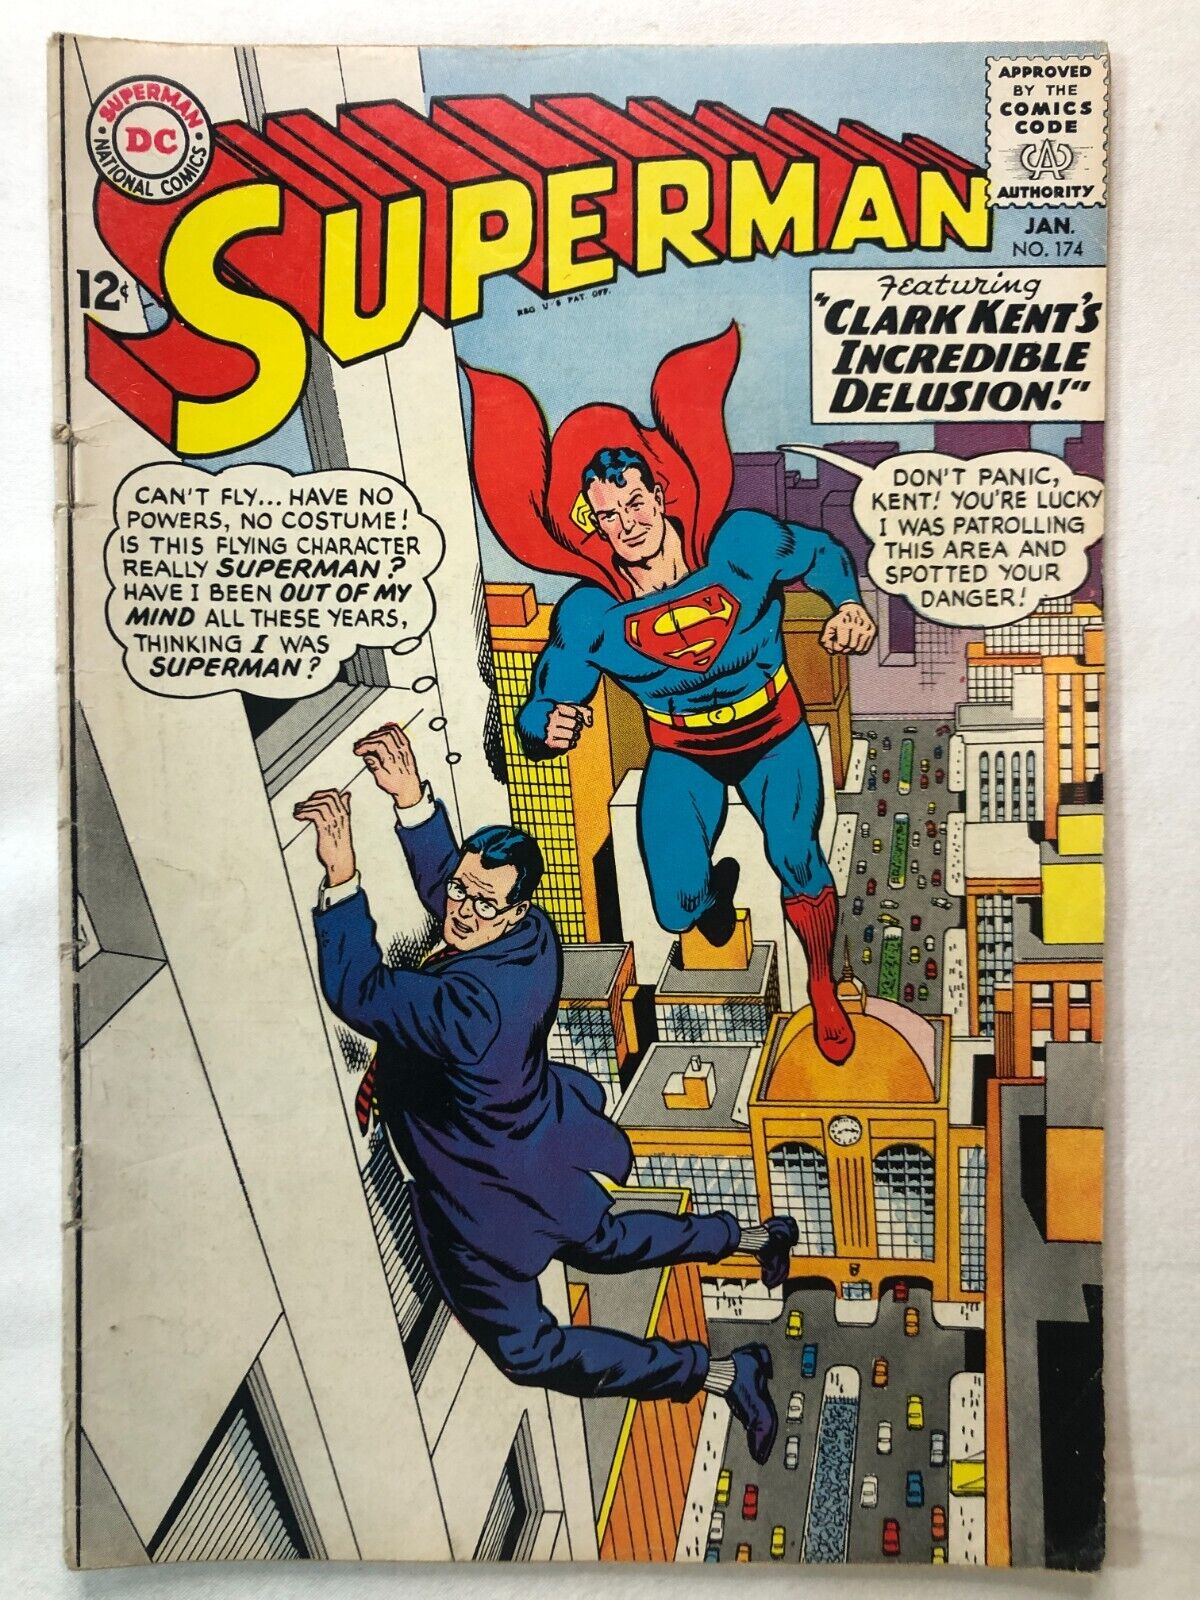 Superman #174 January 1965 Vintage Silver Age DC Comics Collectable Nice